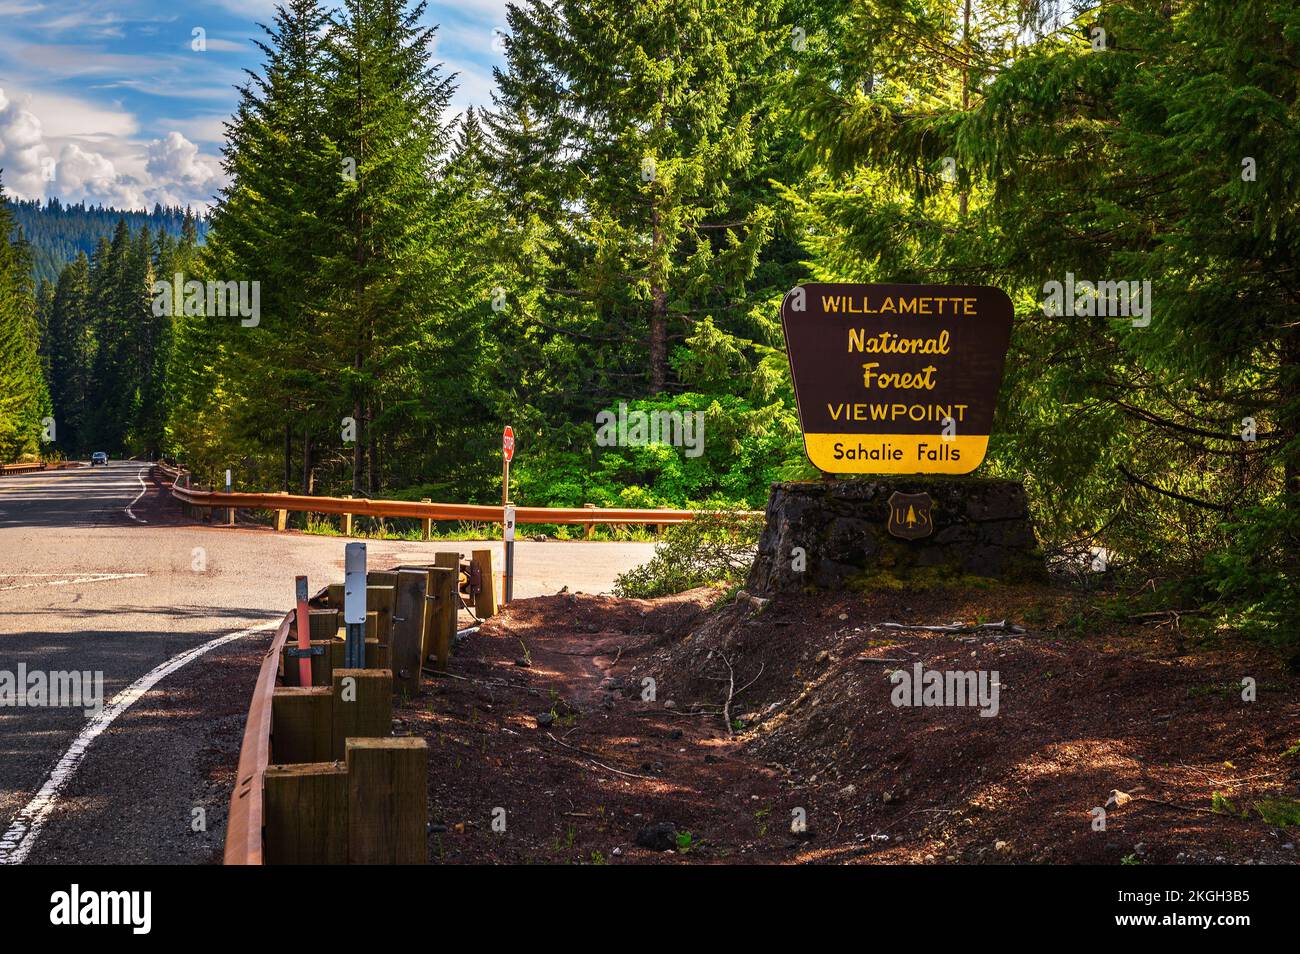 Sahalie Falls in Willamette National Forest street sign in Oregon Stock Photo